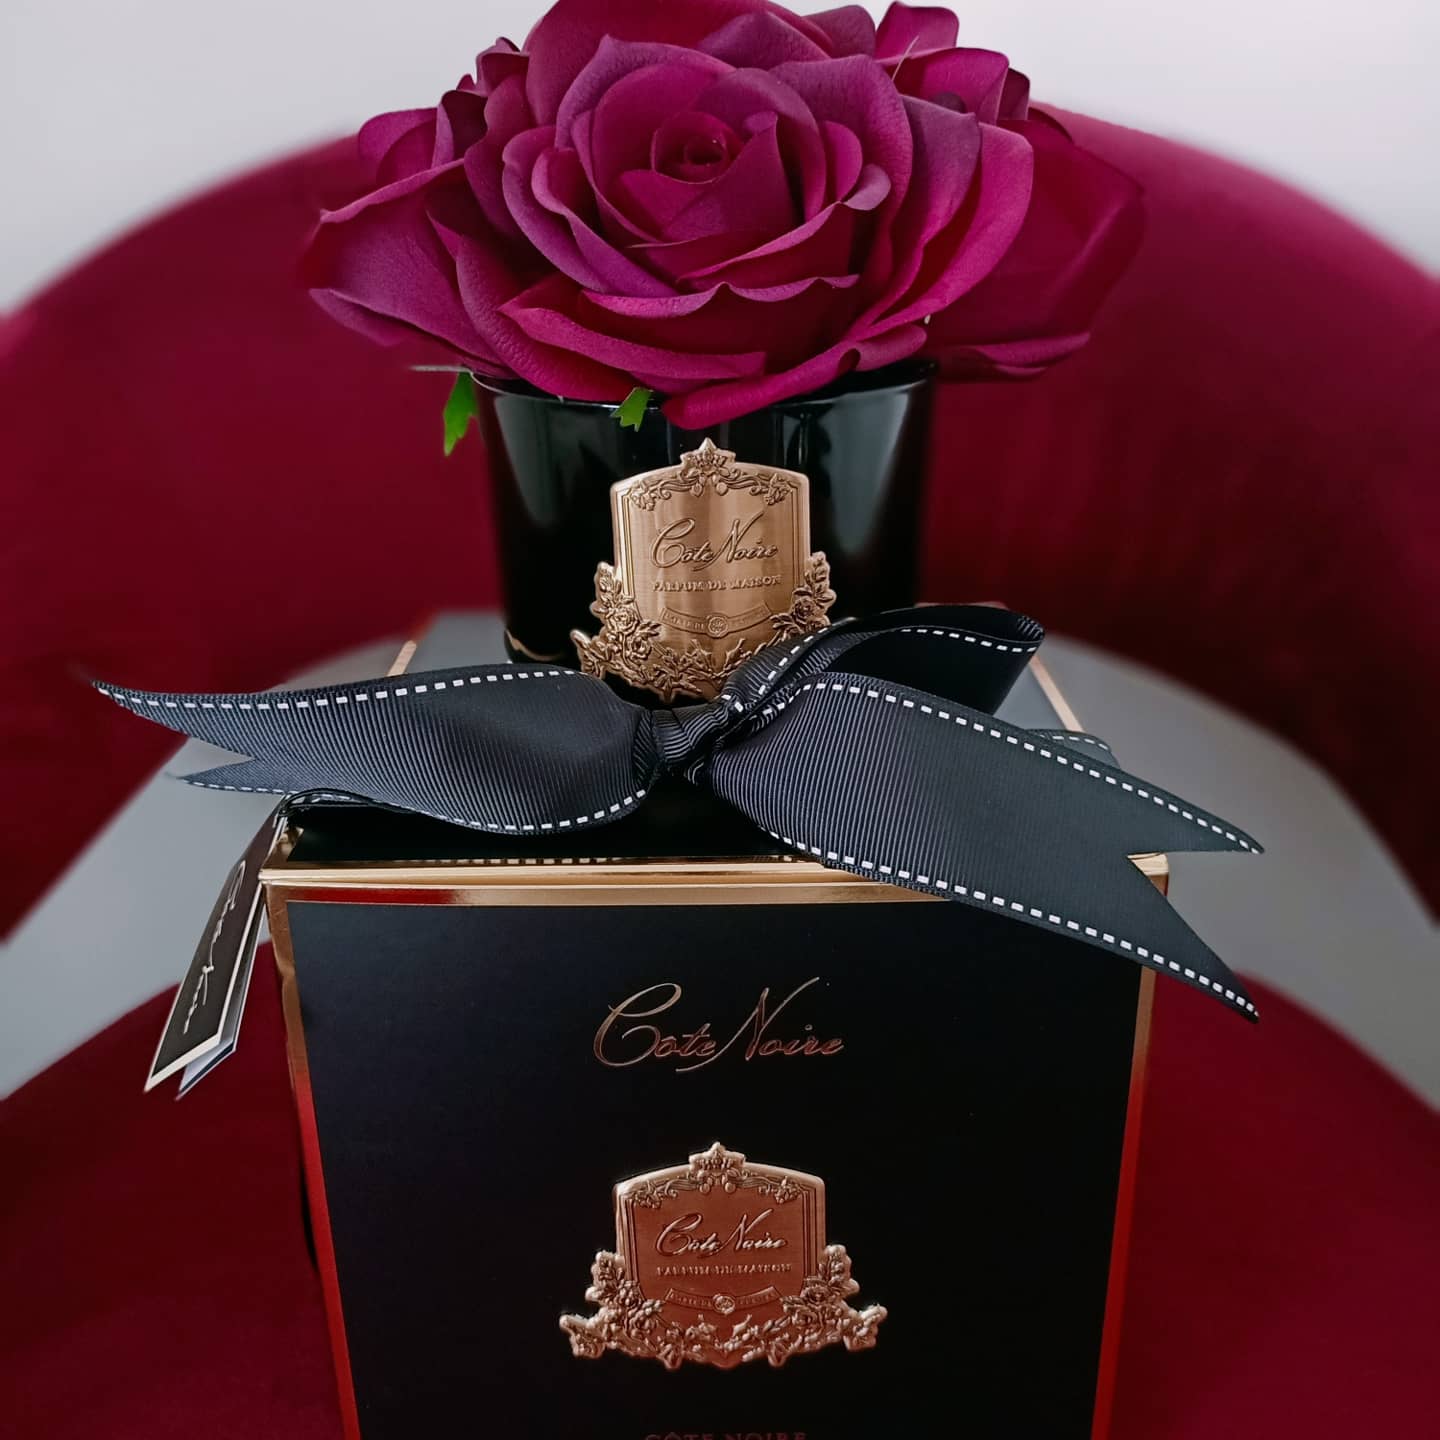 COTE NOIRE Natural Touch Roses - Carmine Red, Black